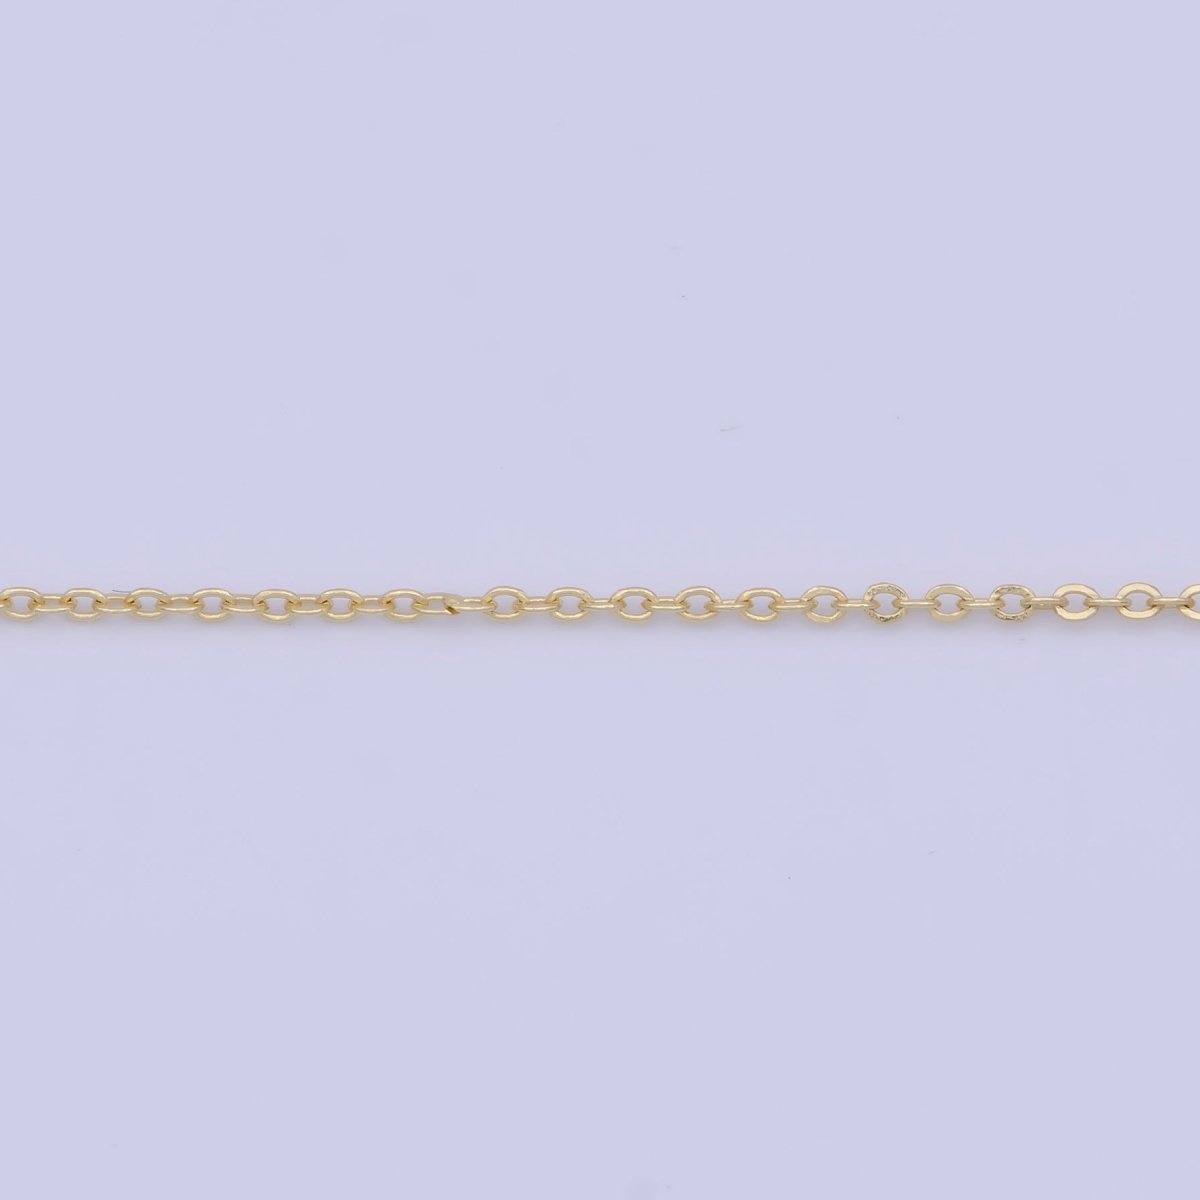 OS Dainty Gold Cable Chain Necklace Fine Link Chain Necklace Ready to Wear 17.5 Inch | WA-1152 Clearance Pricing - DLUXCA